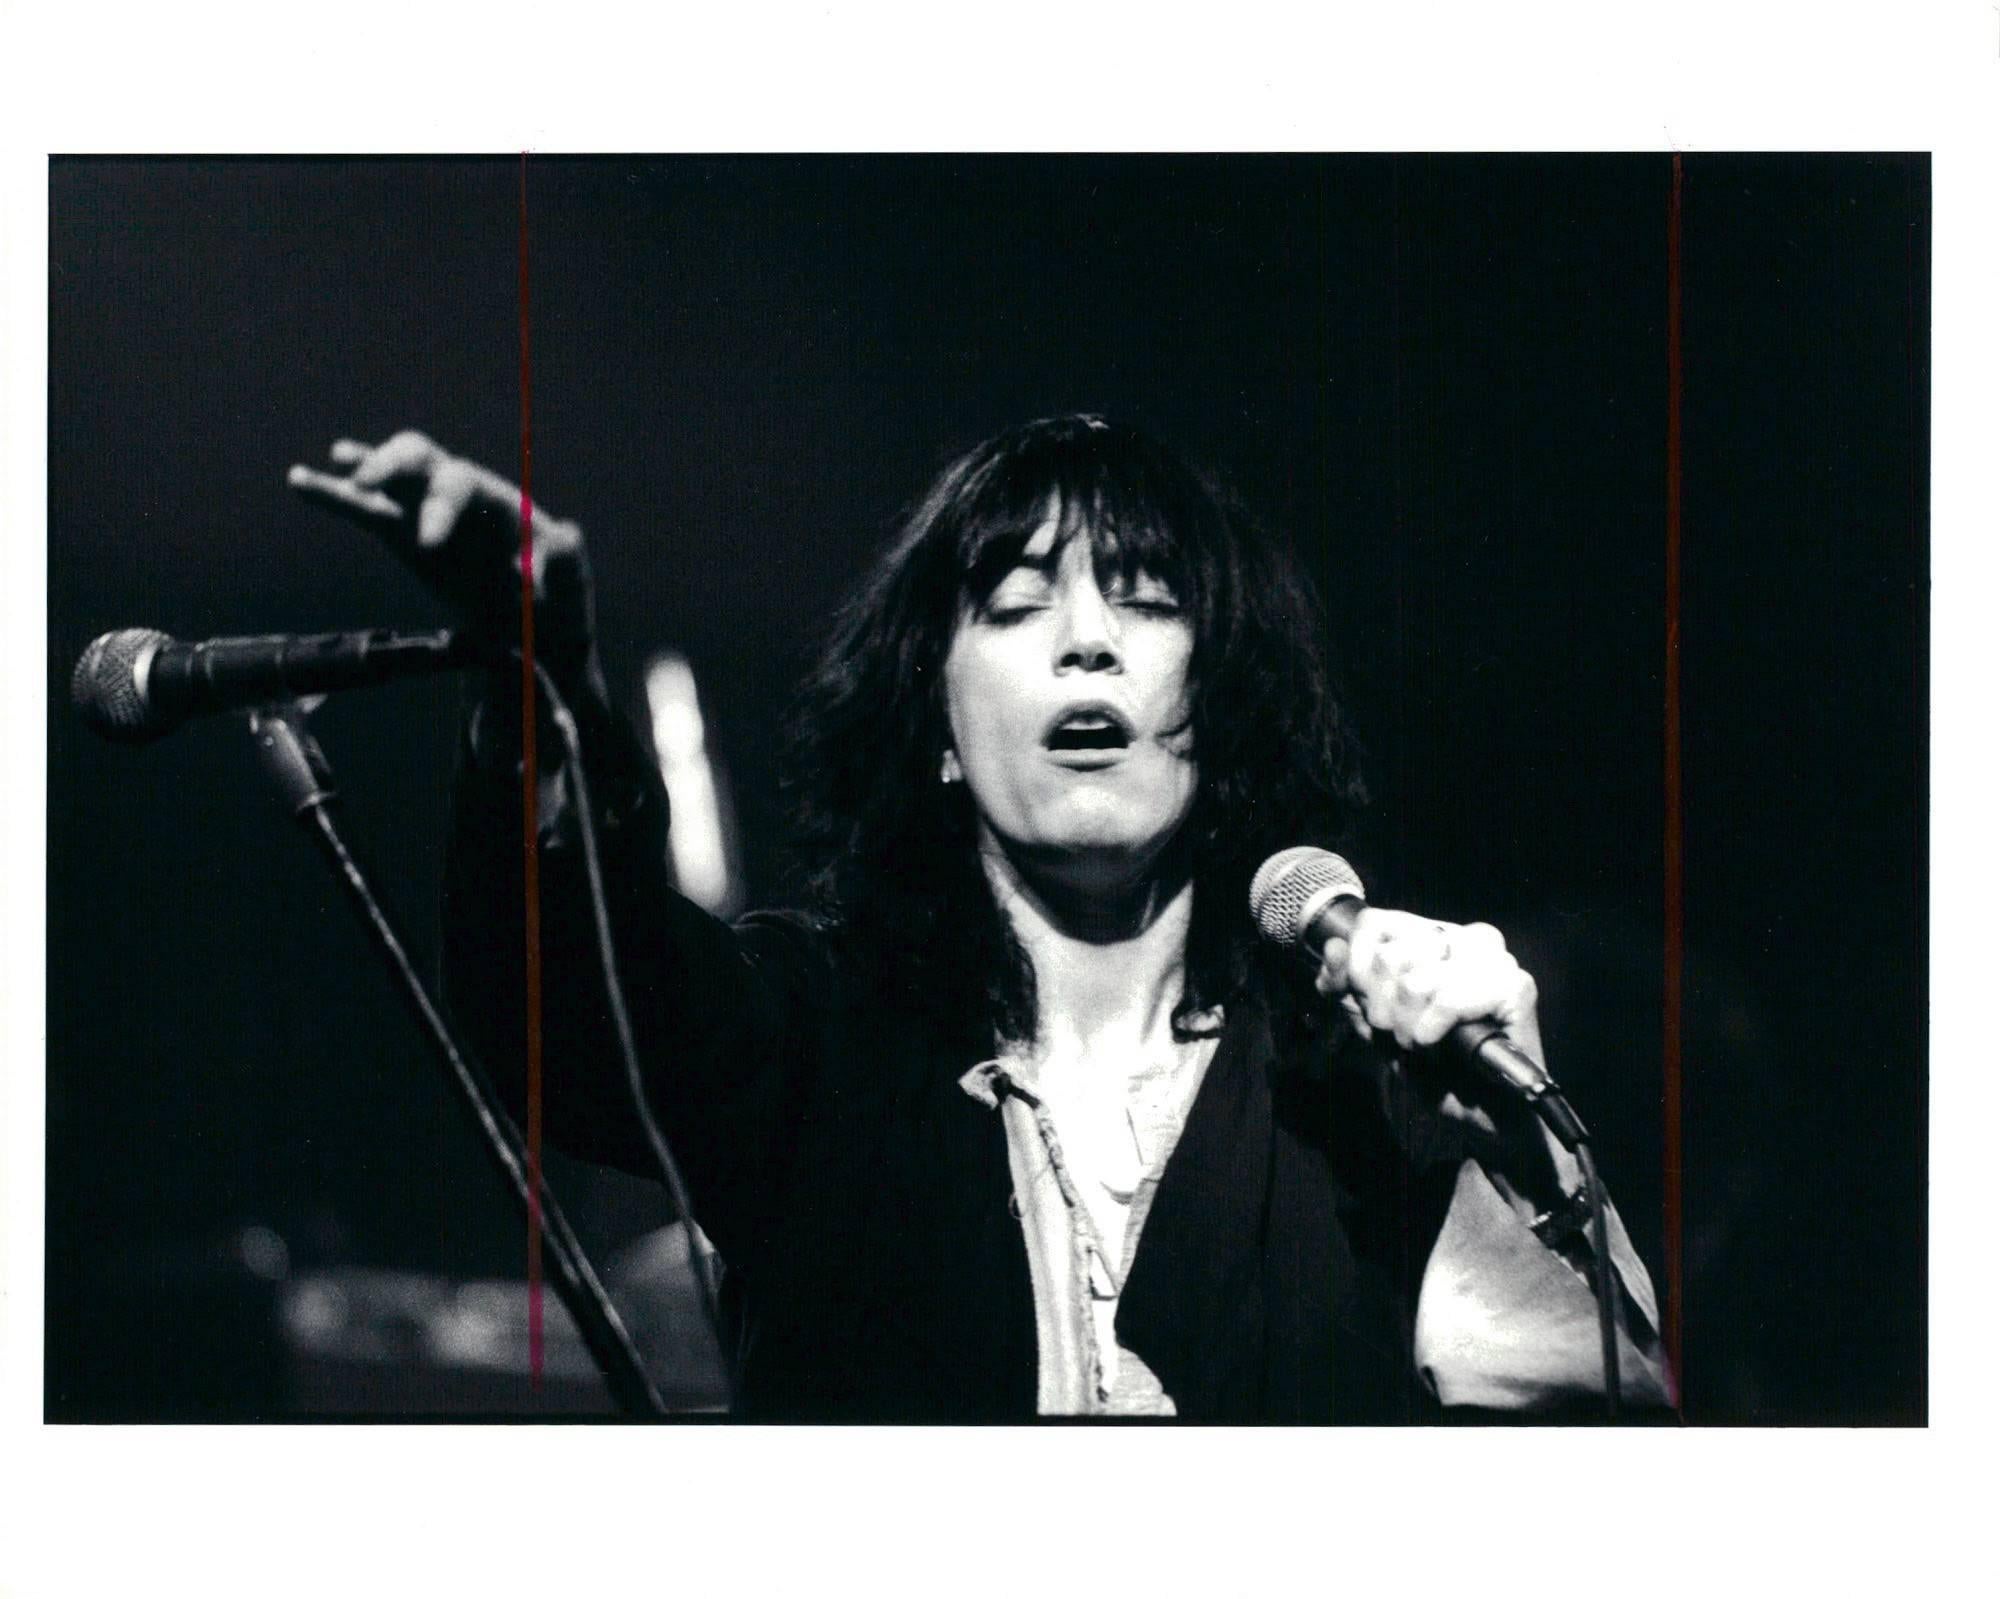 Unknown Black and White Photograph - Vintage 1970s Patti Smith Photograph (Rock Photography)